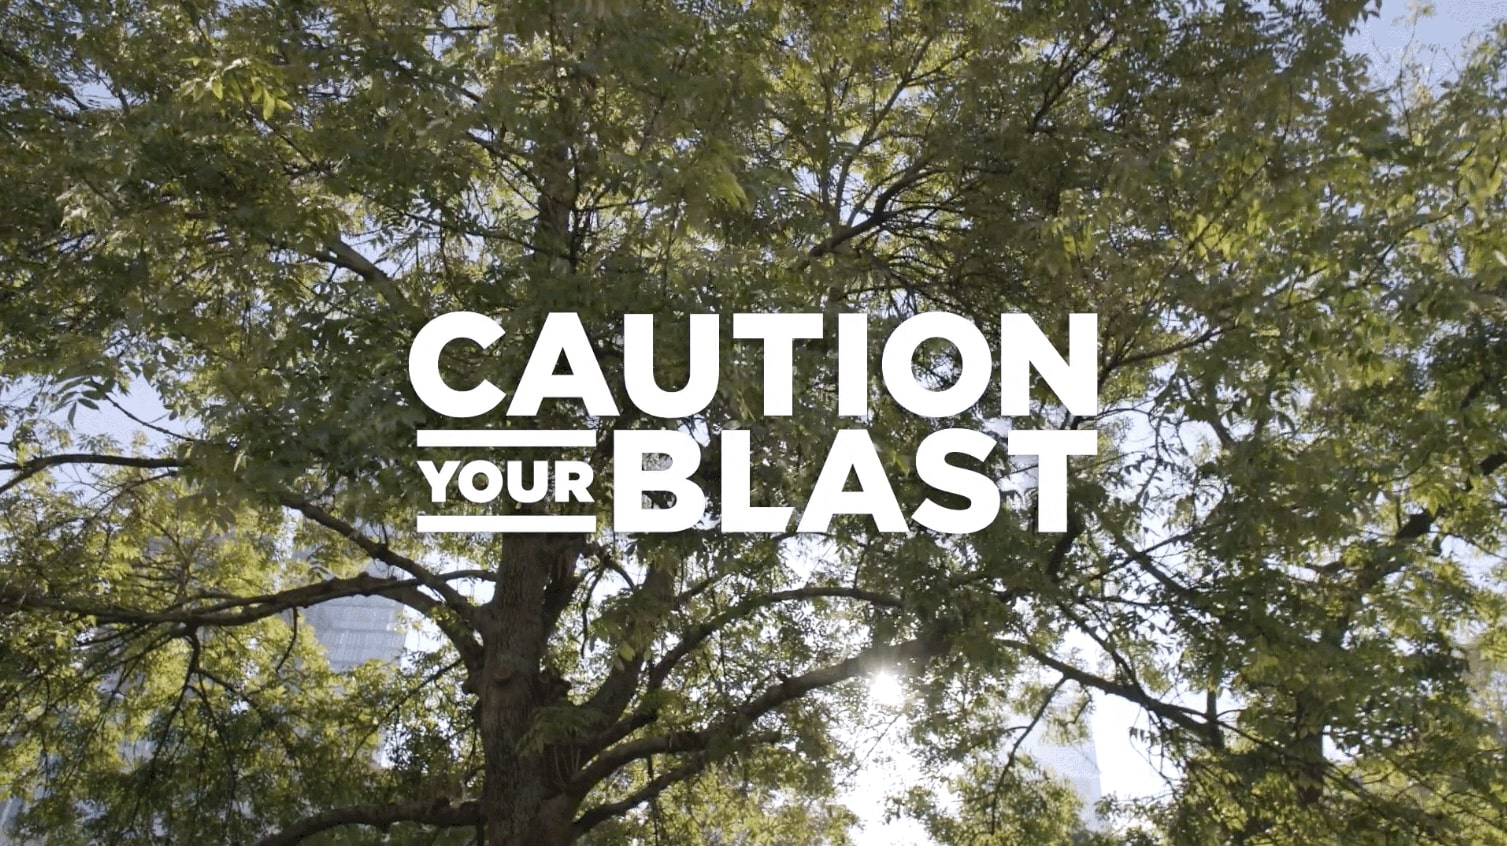 Image of the caution your blast logo surrounded by a tree canopy